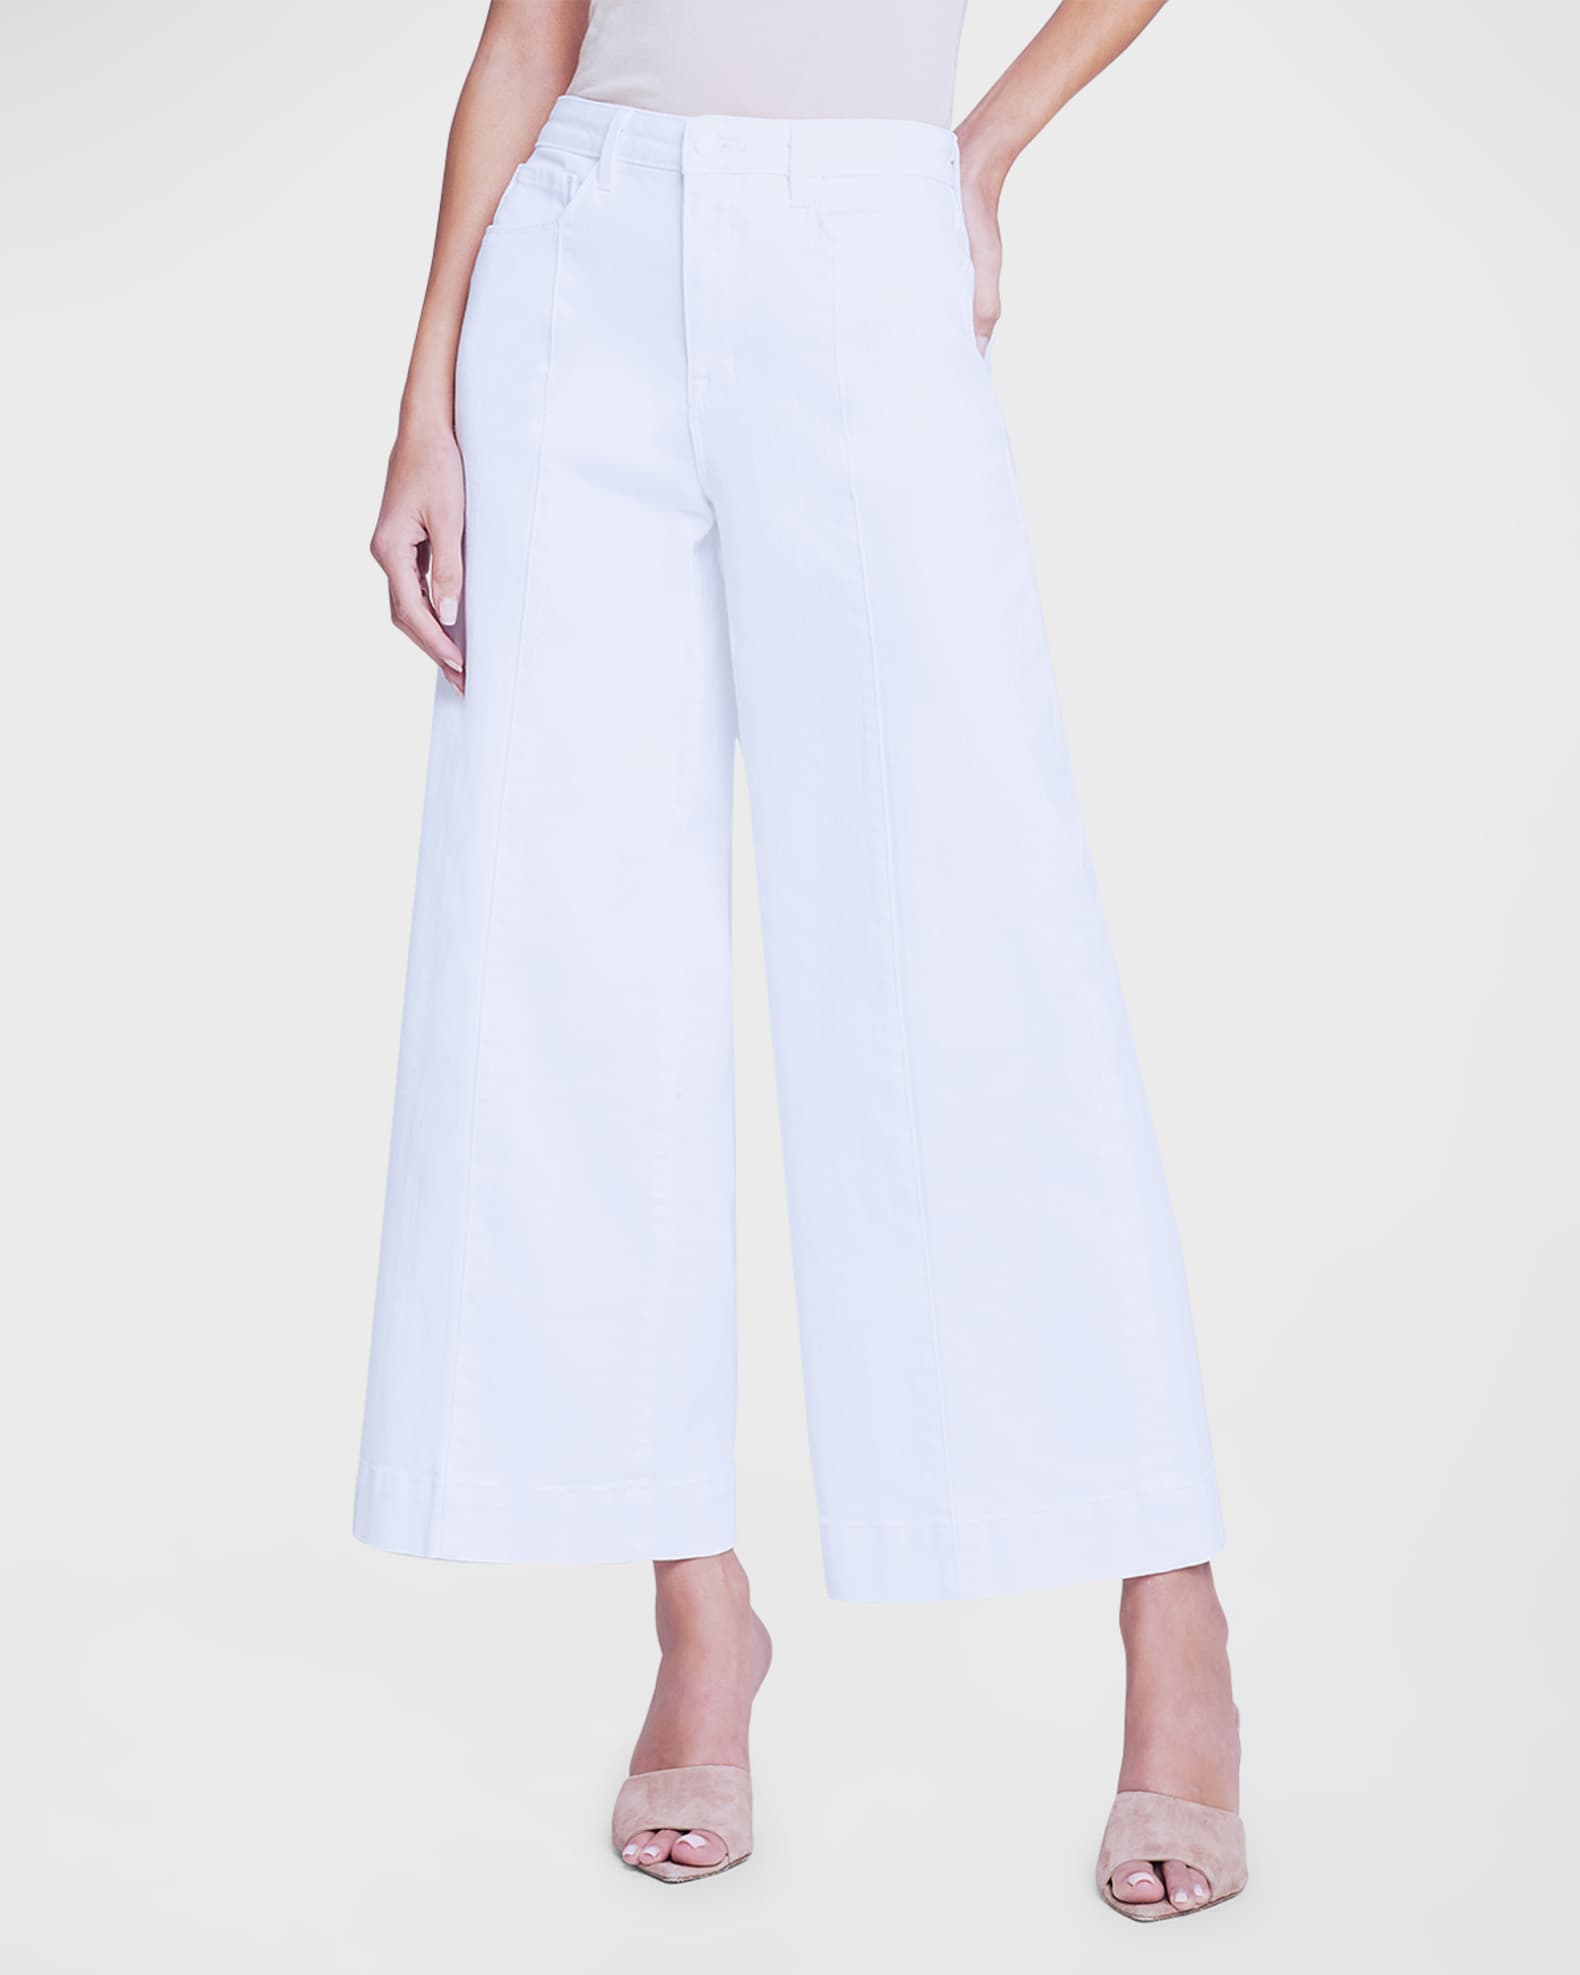 L'Agence Houston High Rise Wide Crop Jeans | Neiman Marcus